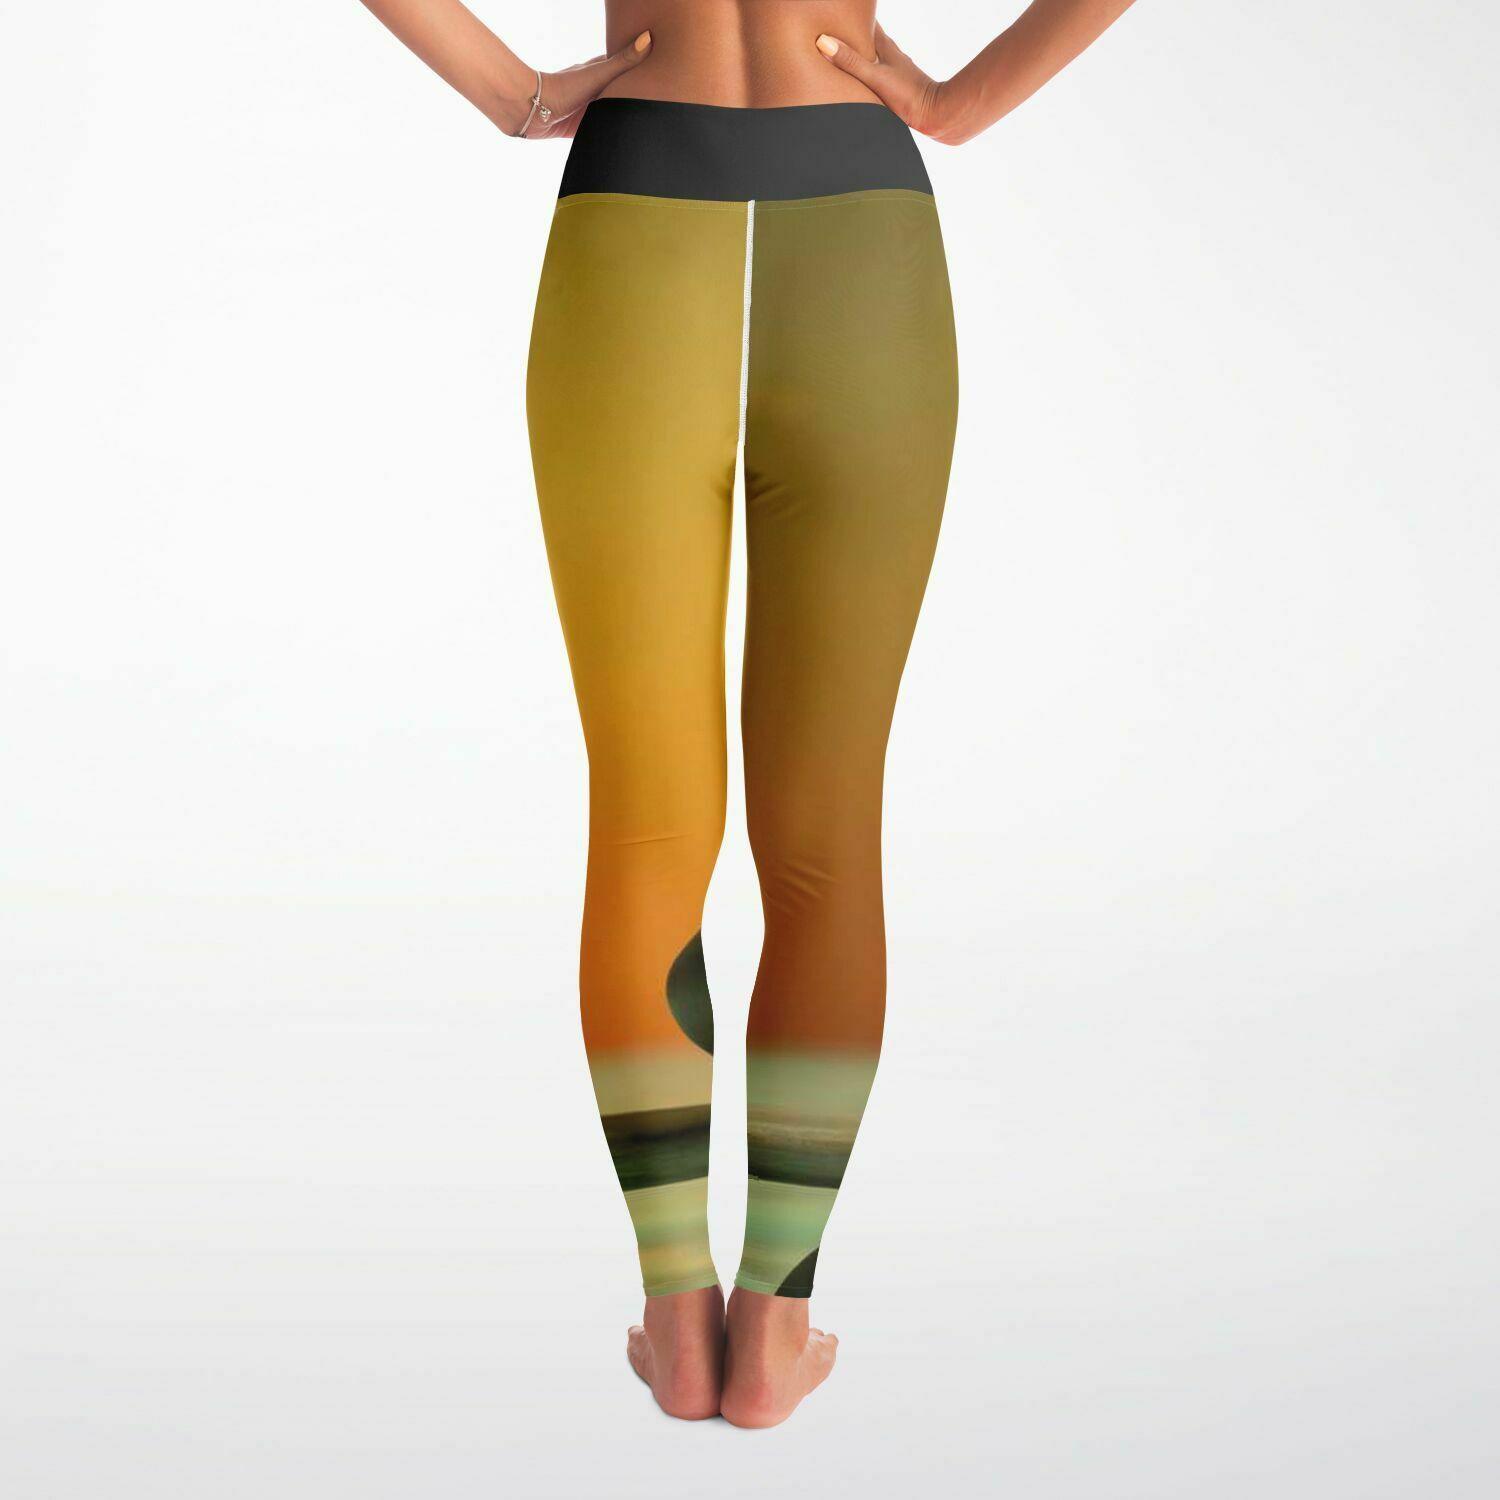 Yoga leggings with inner waistband pocket - Personal Hour for Yoga and Meditations 